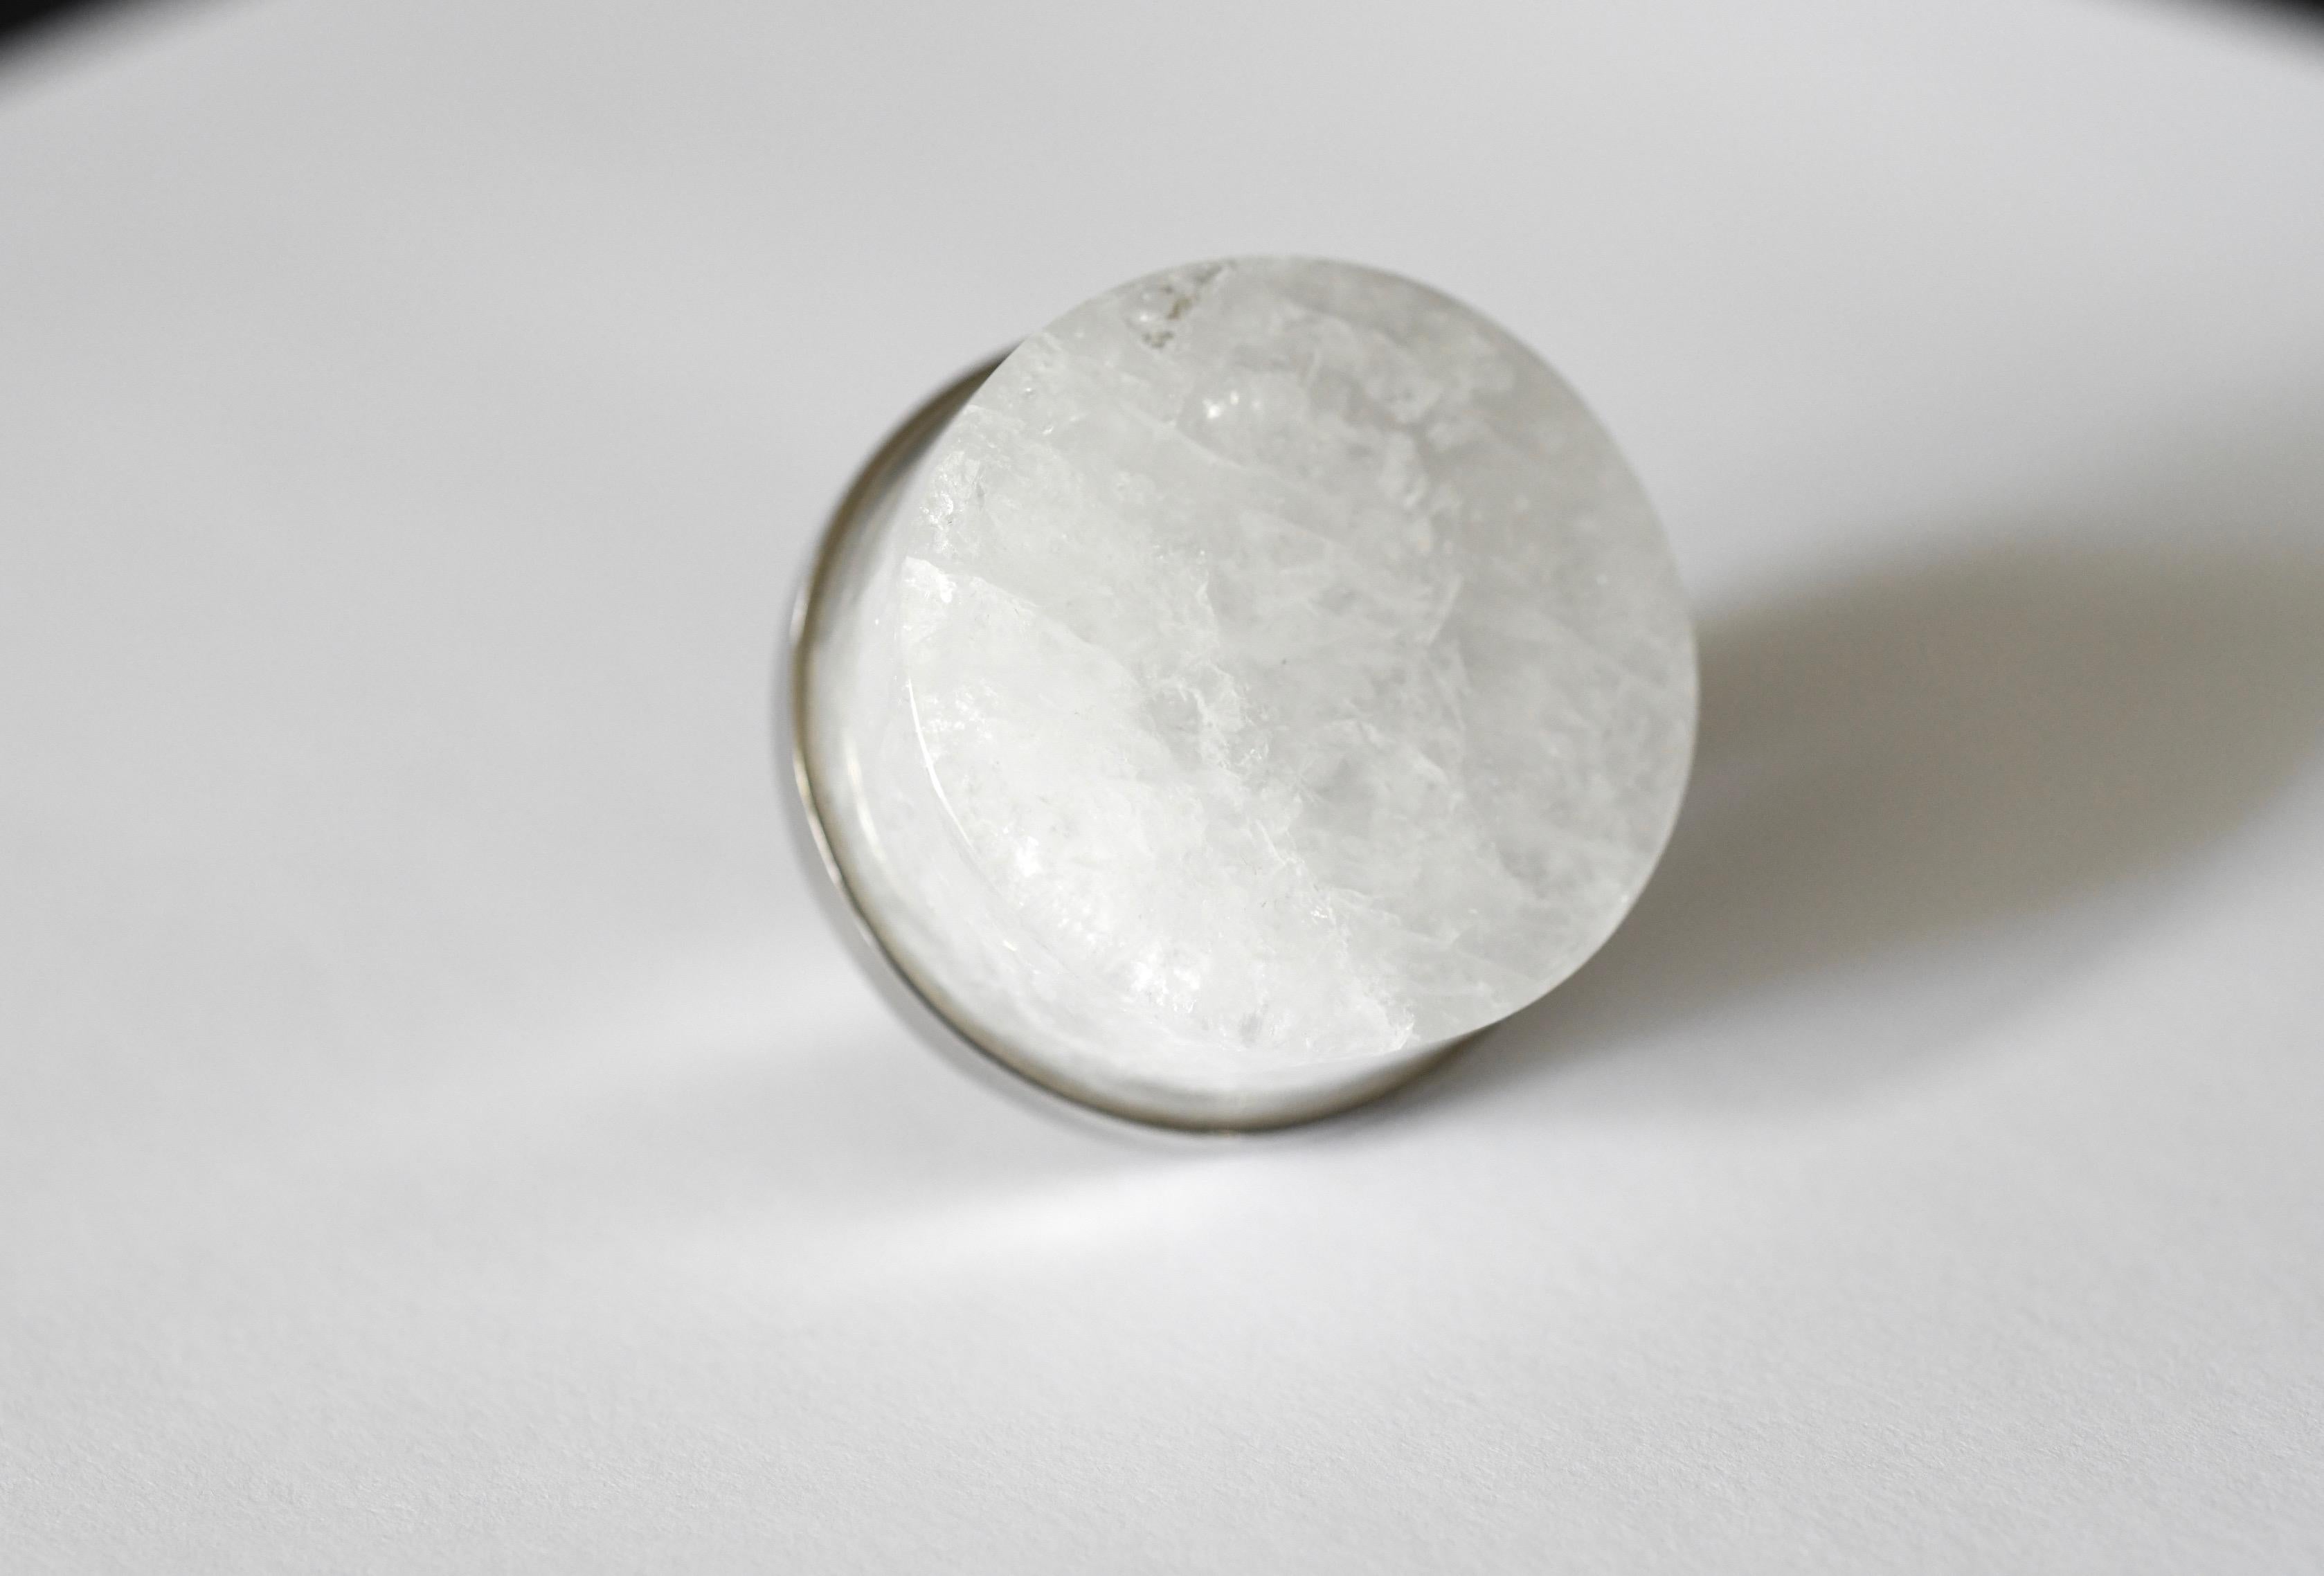 Circular form rock crystal quartz knob with nickel base. Created by Phoenix Gallery, NYC.
Custom size and finish upon request.